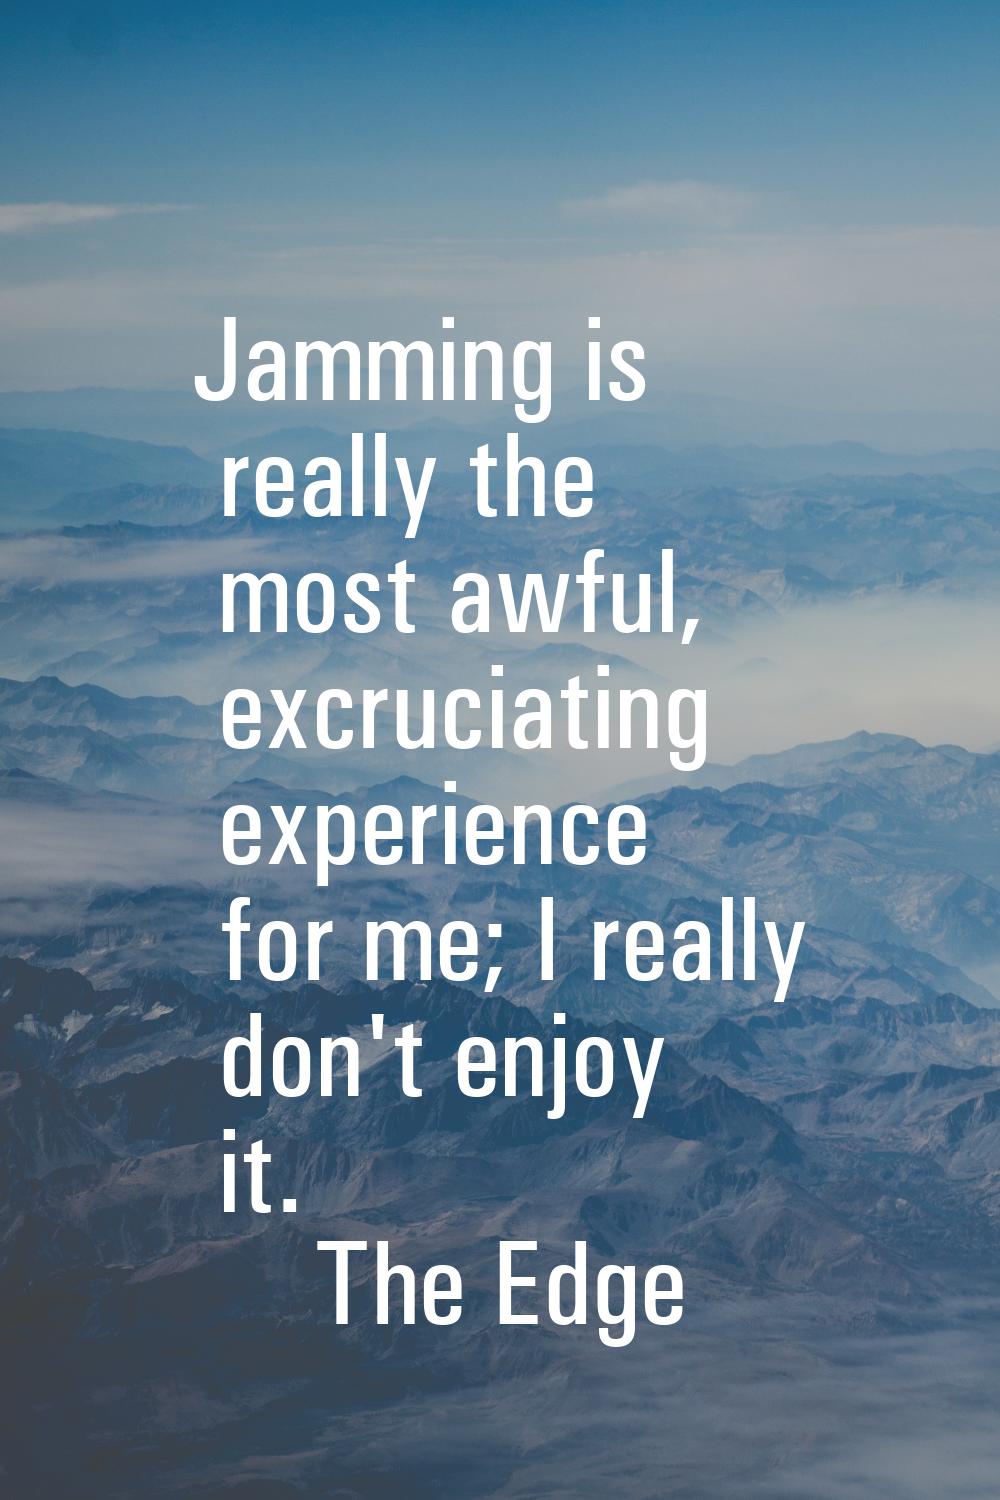 Jamming is really the most awful, excruciating experience for me; I really don't enjoy it.